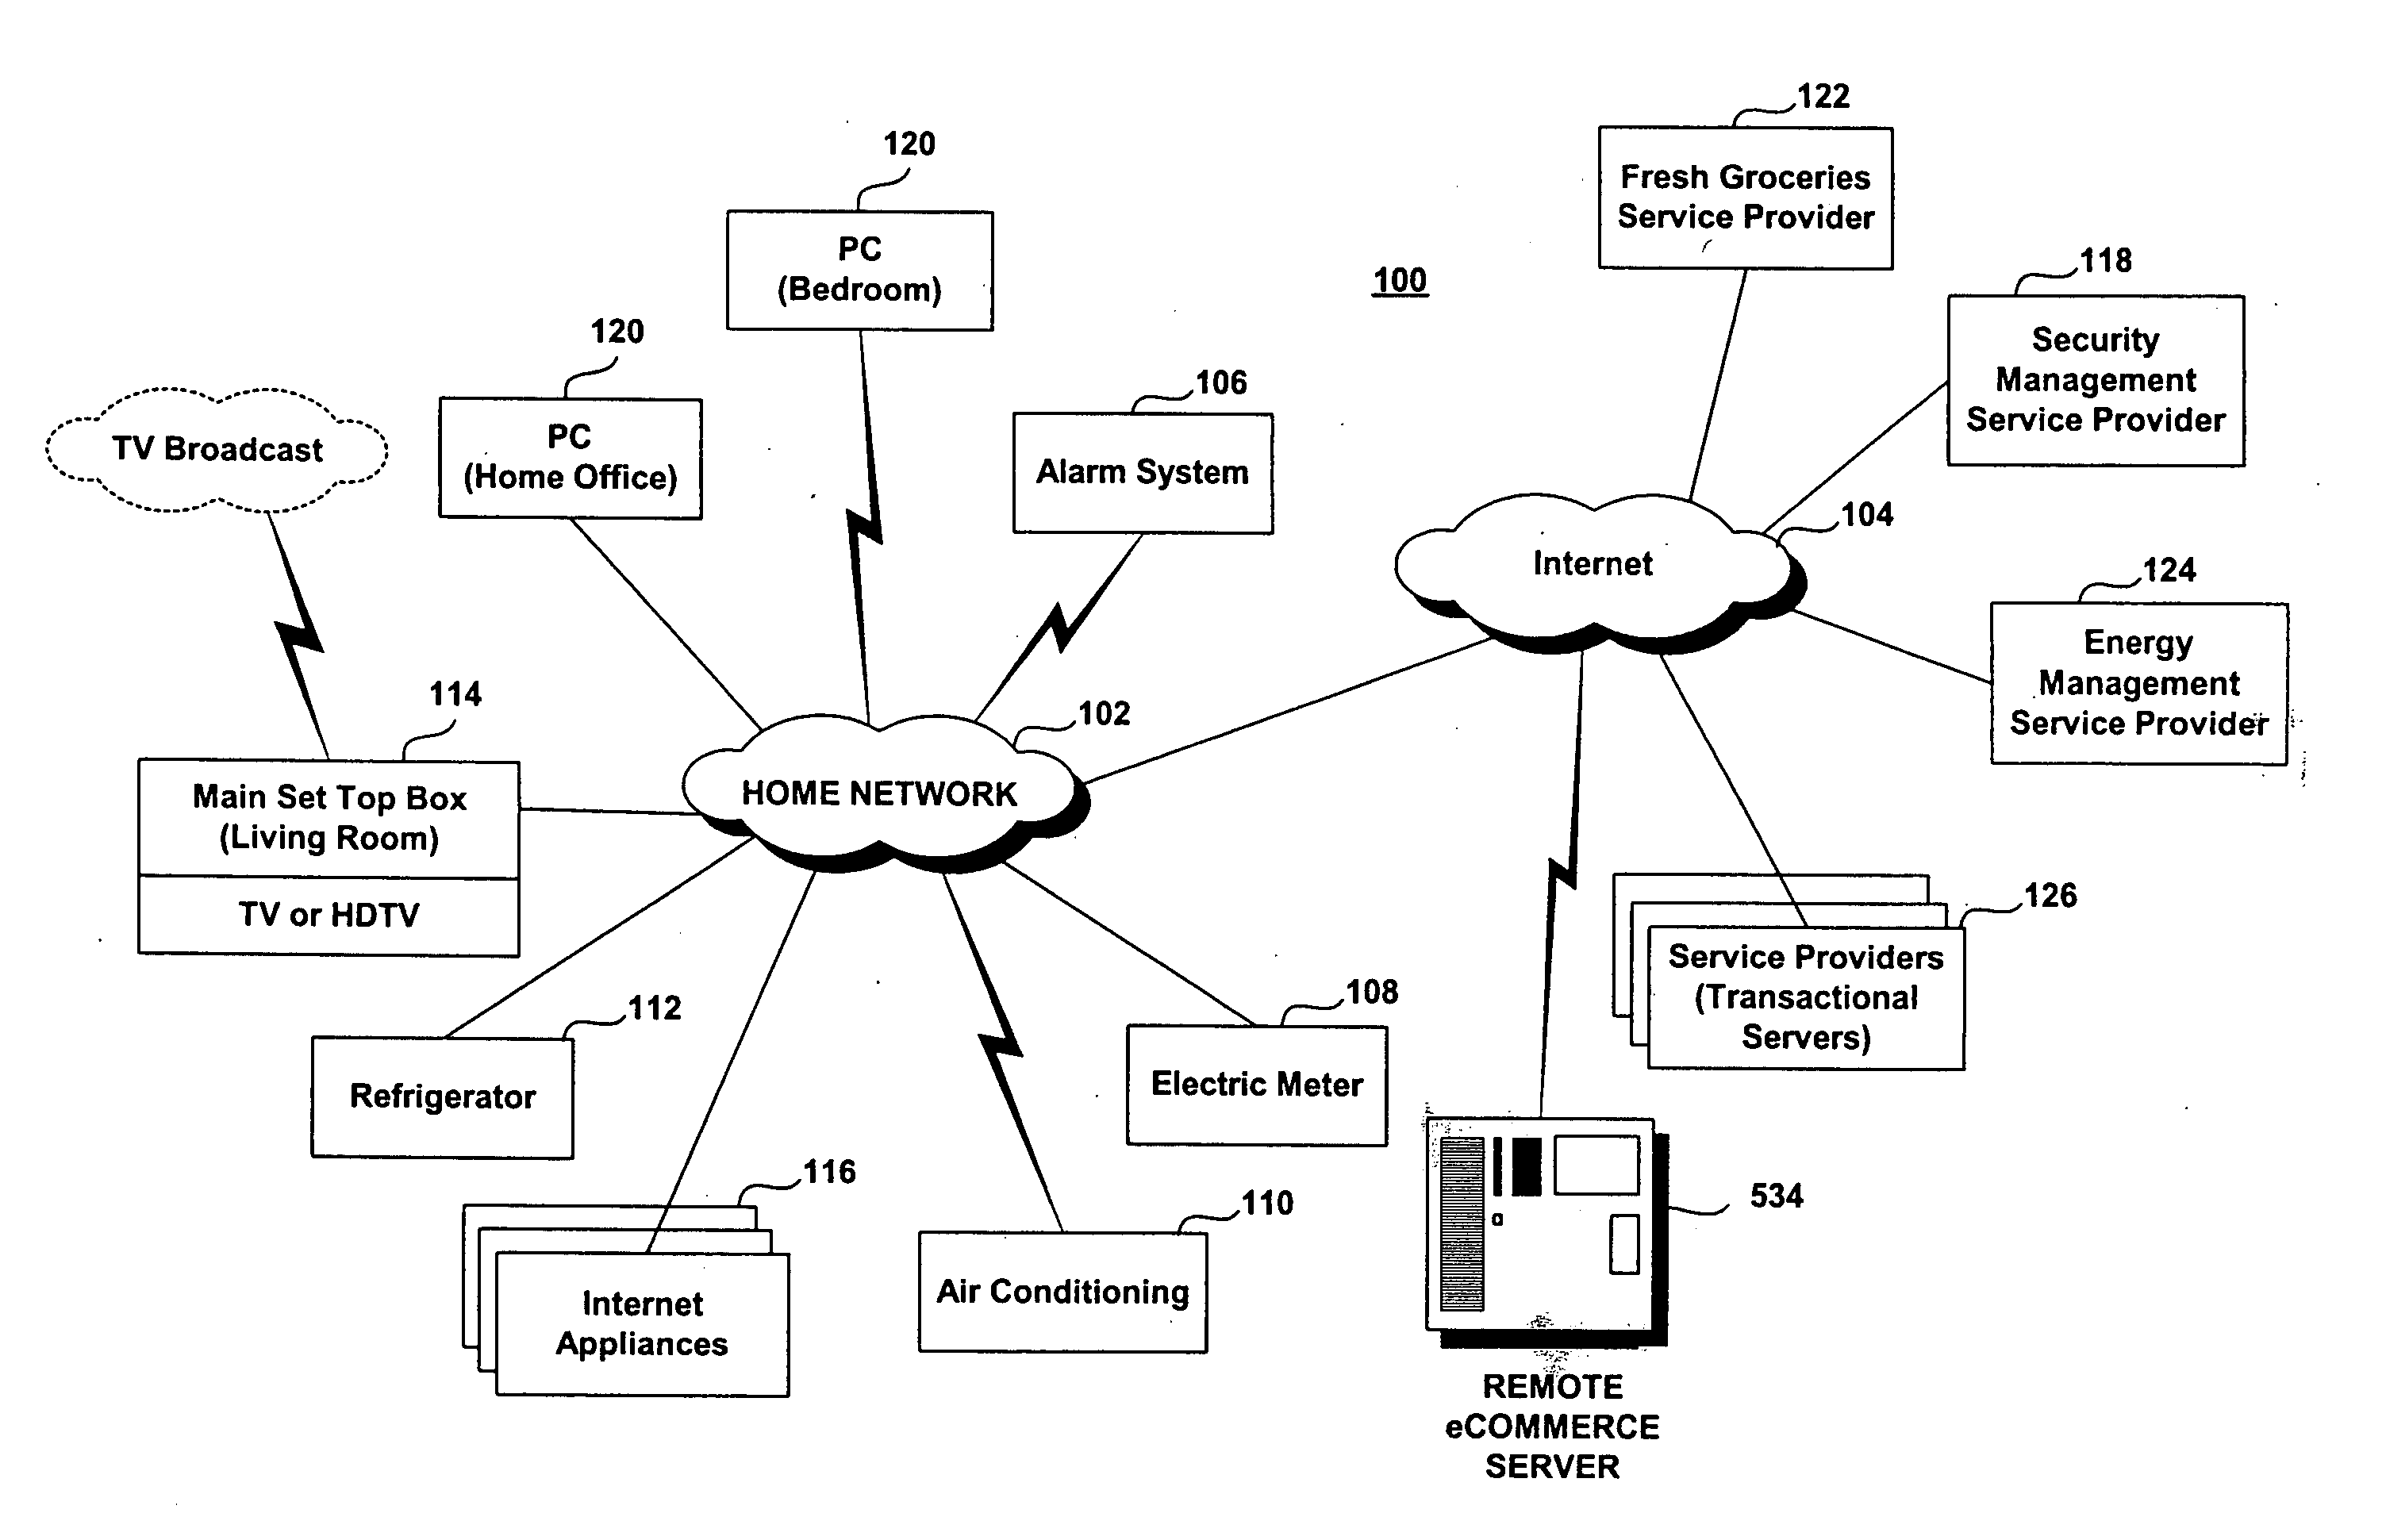 Method and apparatus for fast transaction commit over unreliable networks